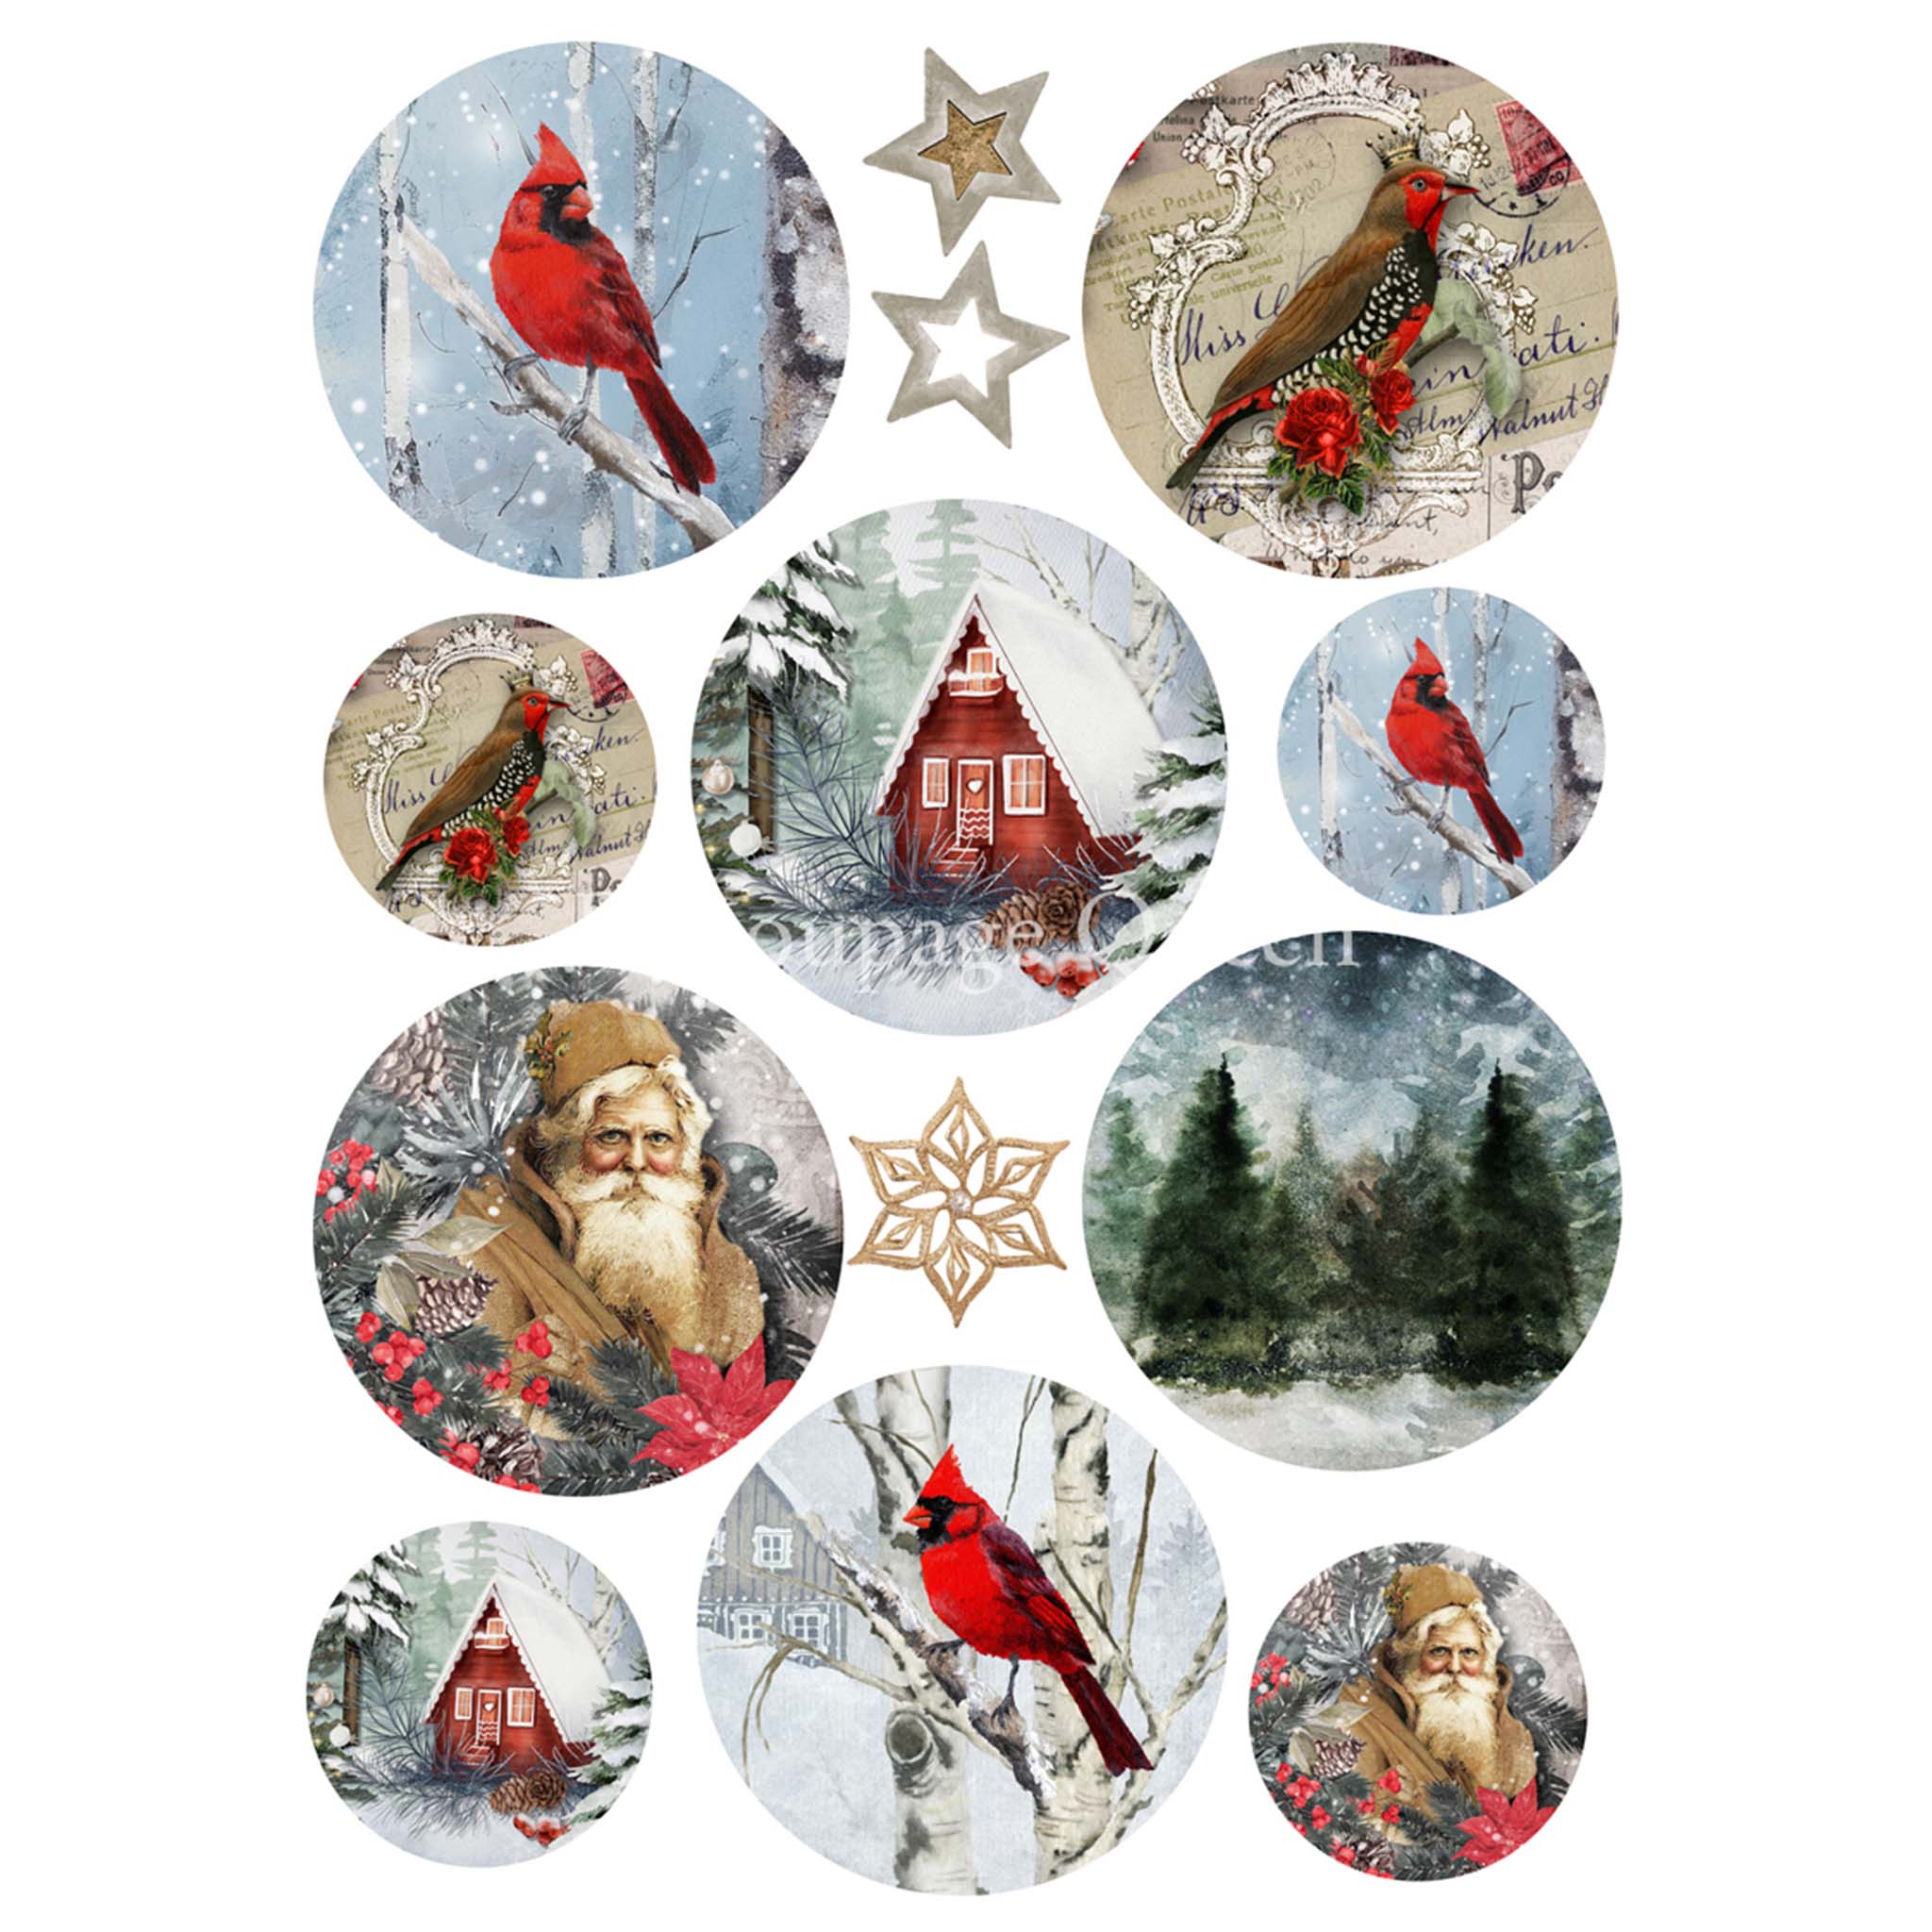 A3 rice paper design that features 10 beautiful circle ornament designs featuring cardinals, Santa, and classic winter scenes.